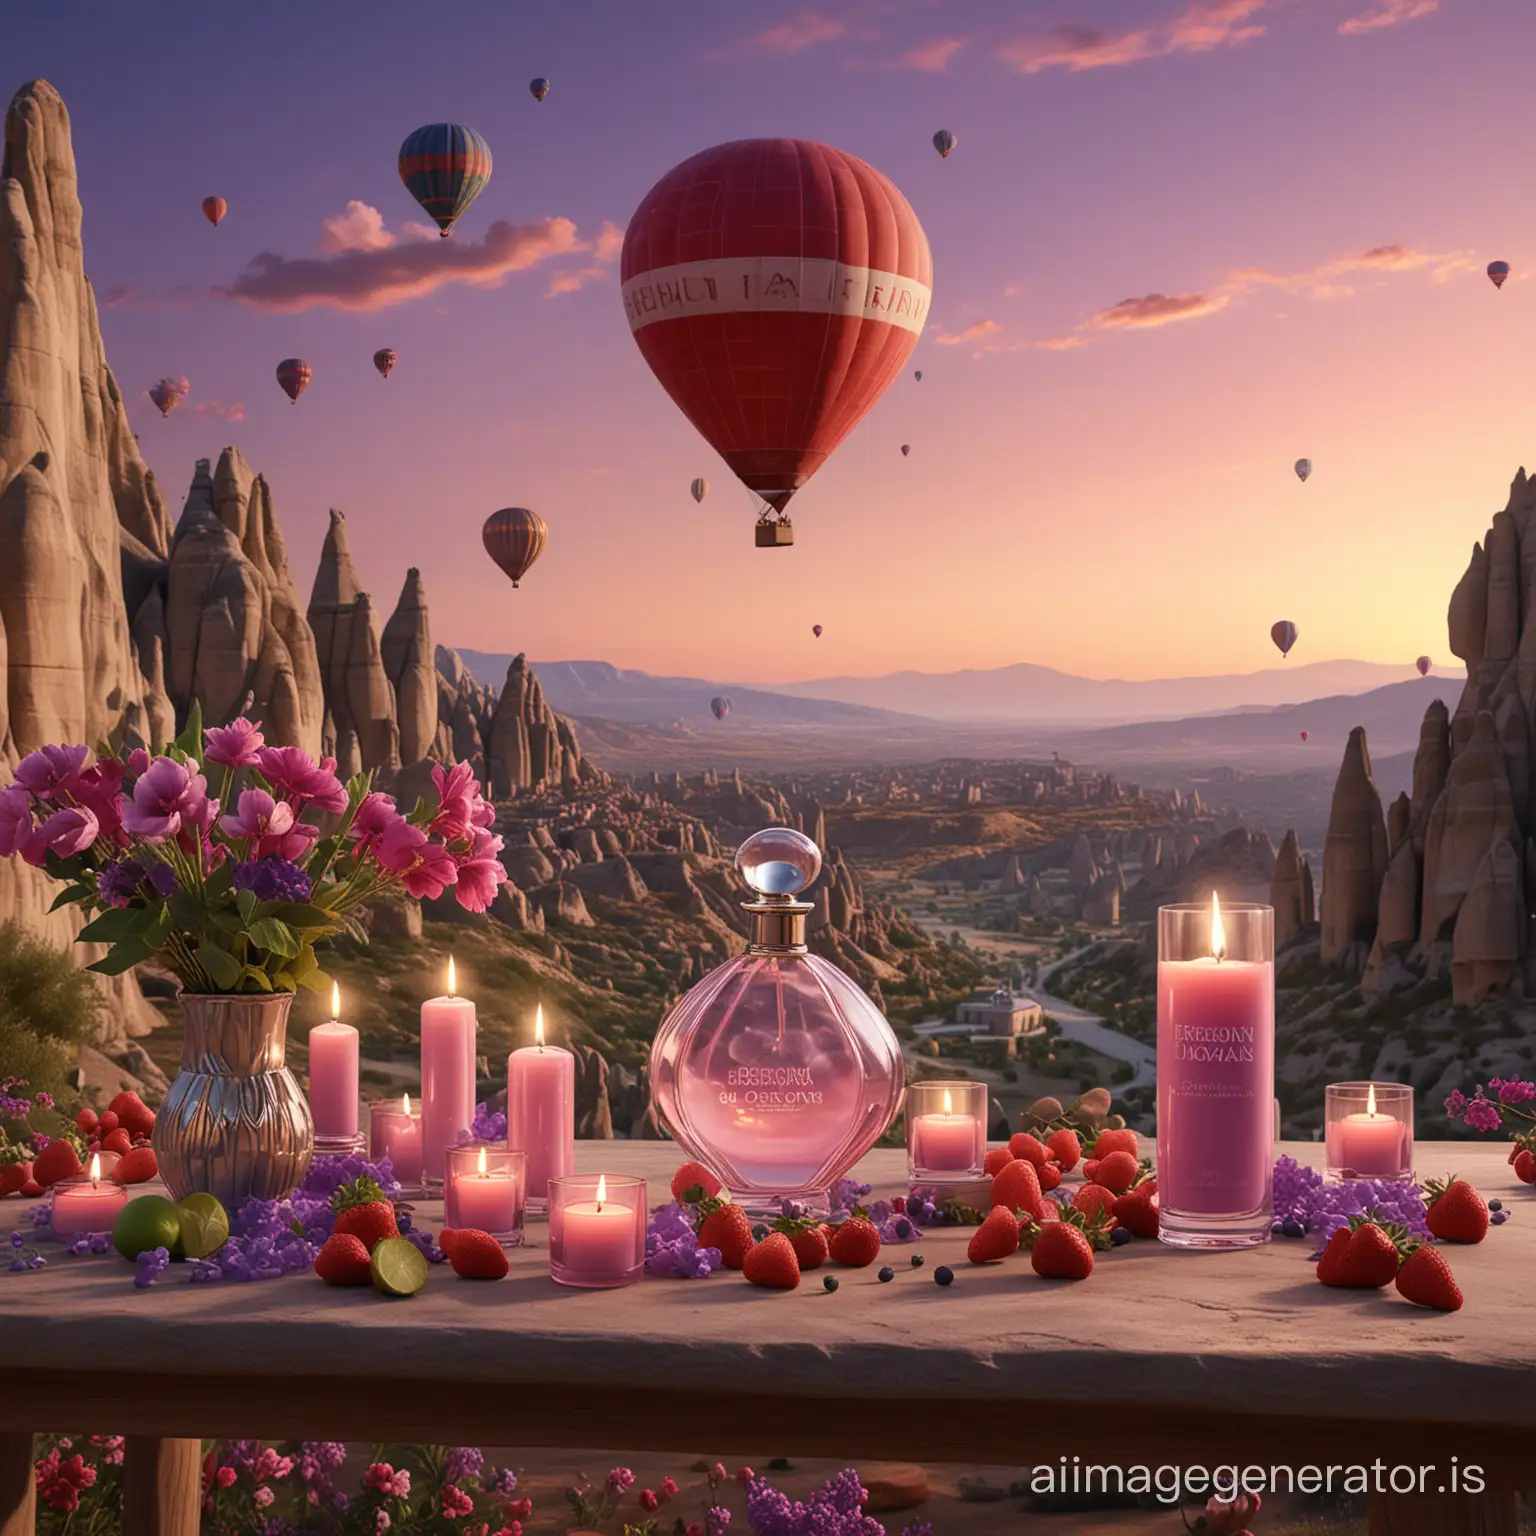 a hyper-realistic 3d rendering of a perfume product on a table, surrounded by romantic candles, fruits such as strawberry, lime, berry, and patchouli flowers scattered against the backdrop of a Cappadocia landscape where many hot air balloons are flying and a romantic atmosphere with a purple sky.